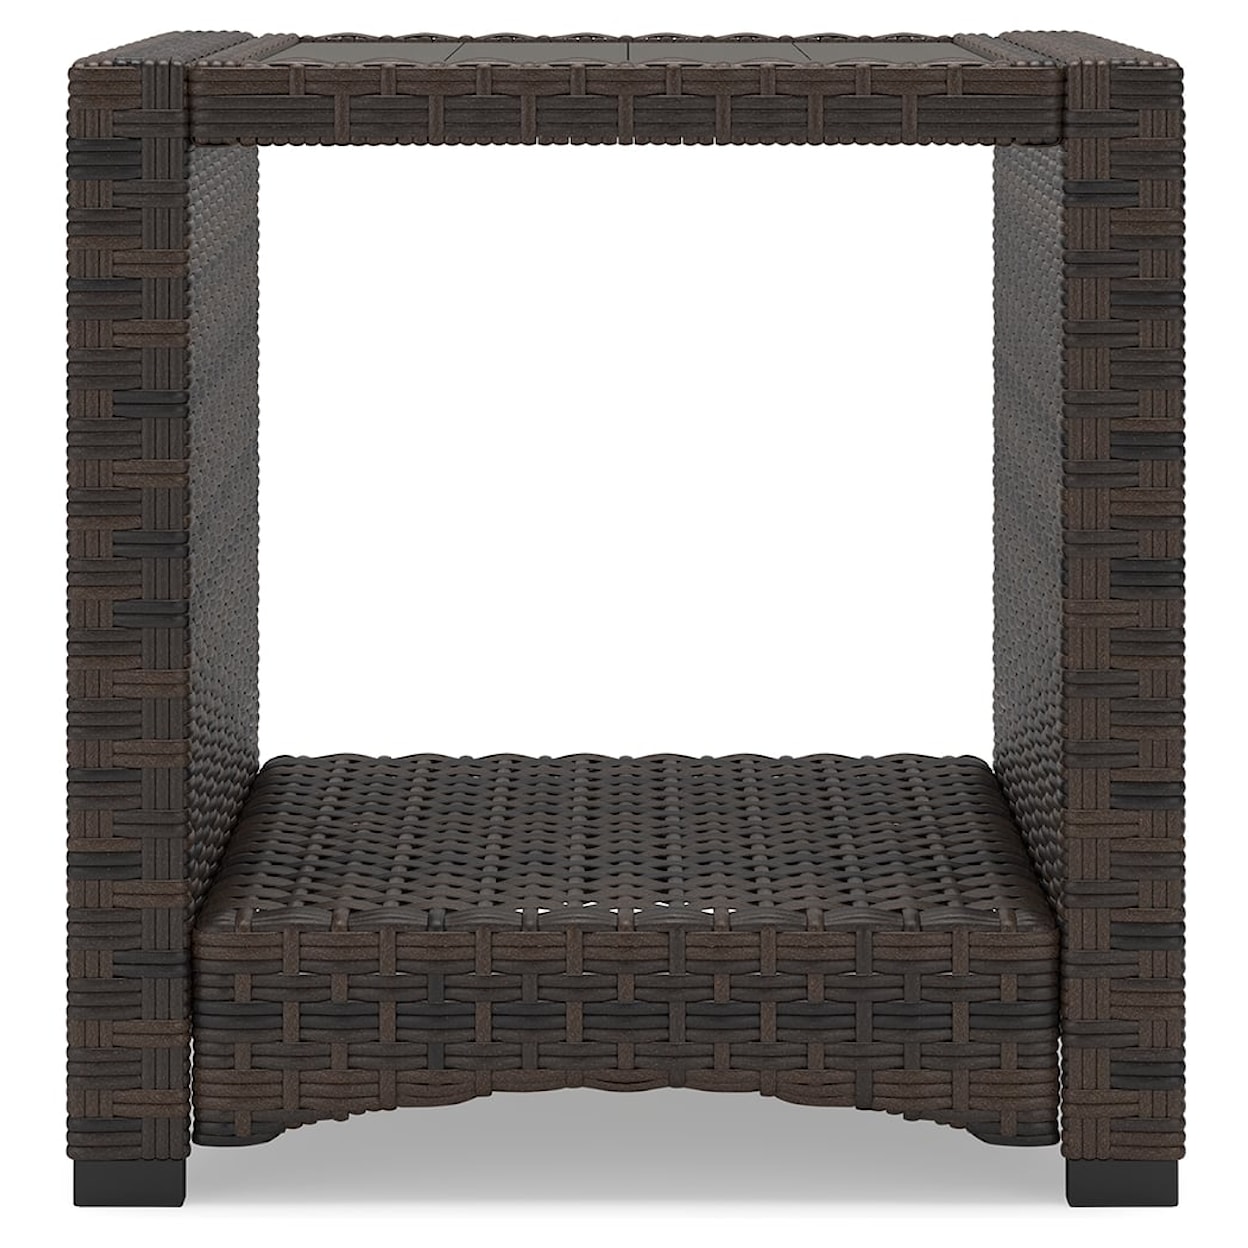 Ashley Furniture Signature Design Windglow Outdoor Square End Table